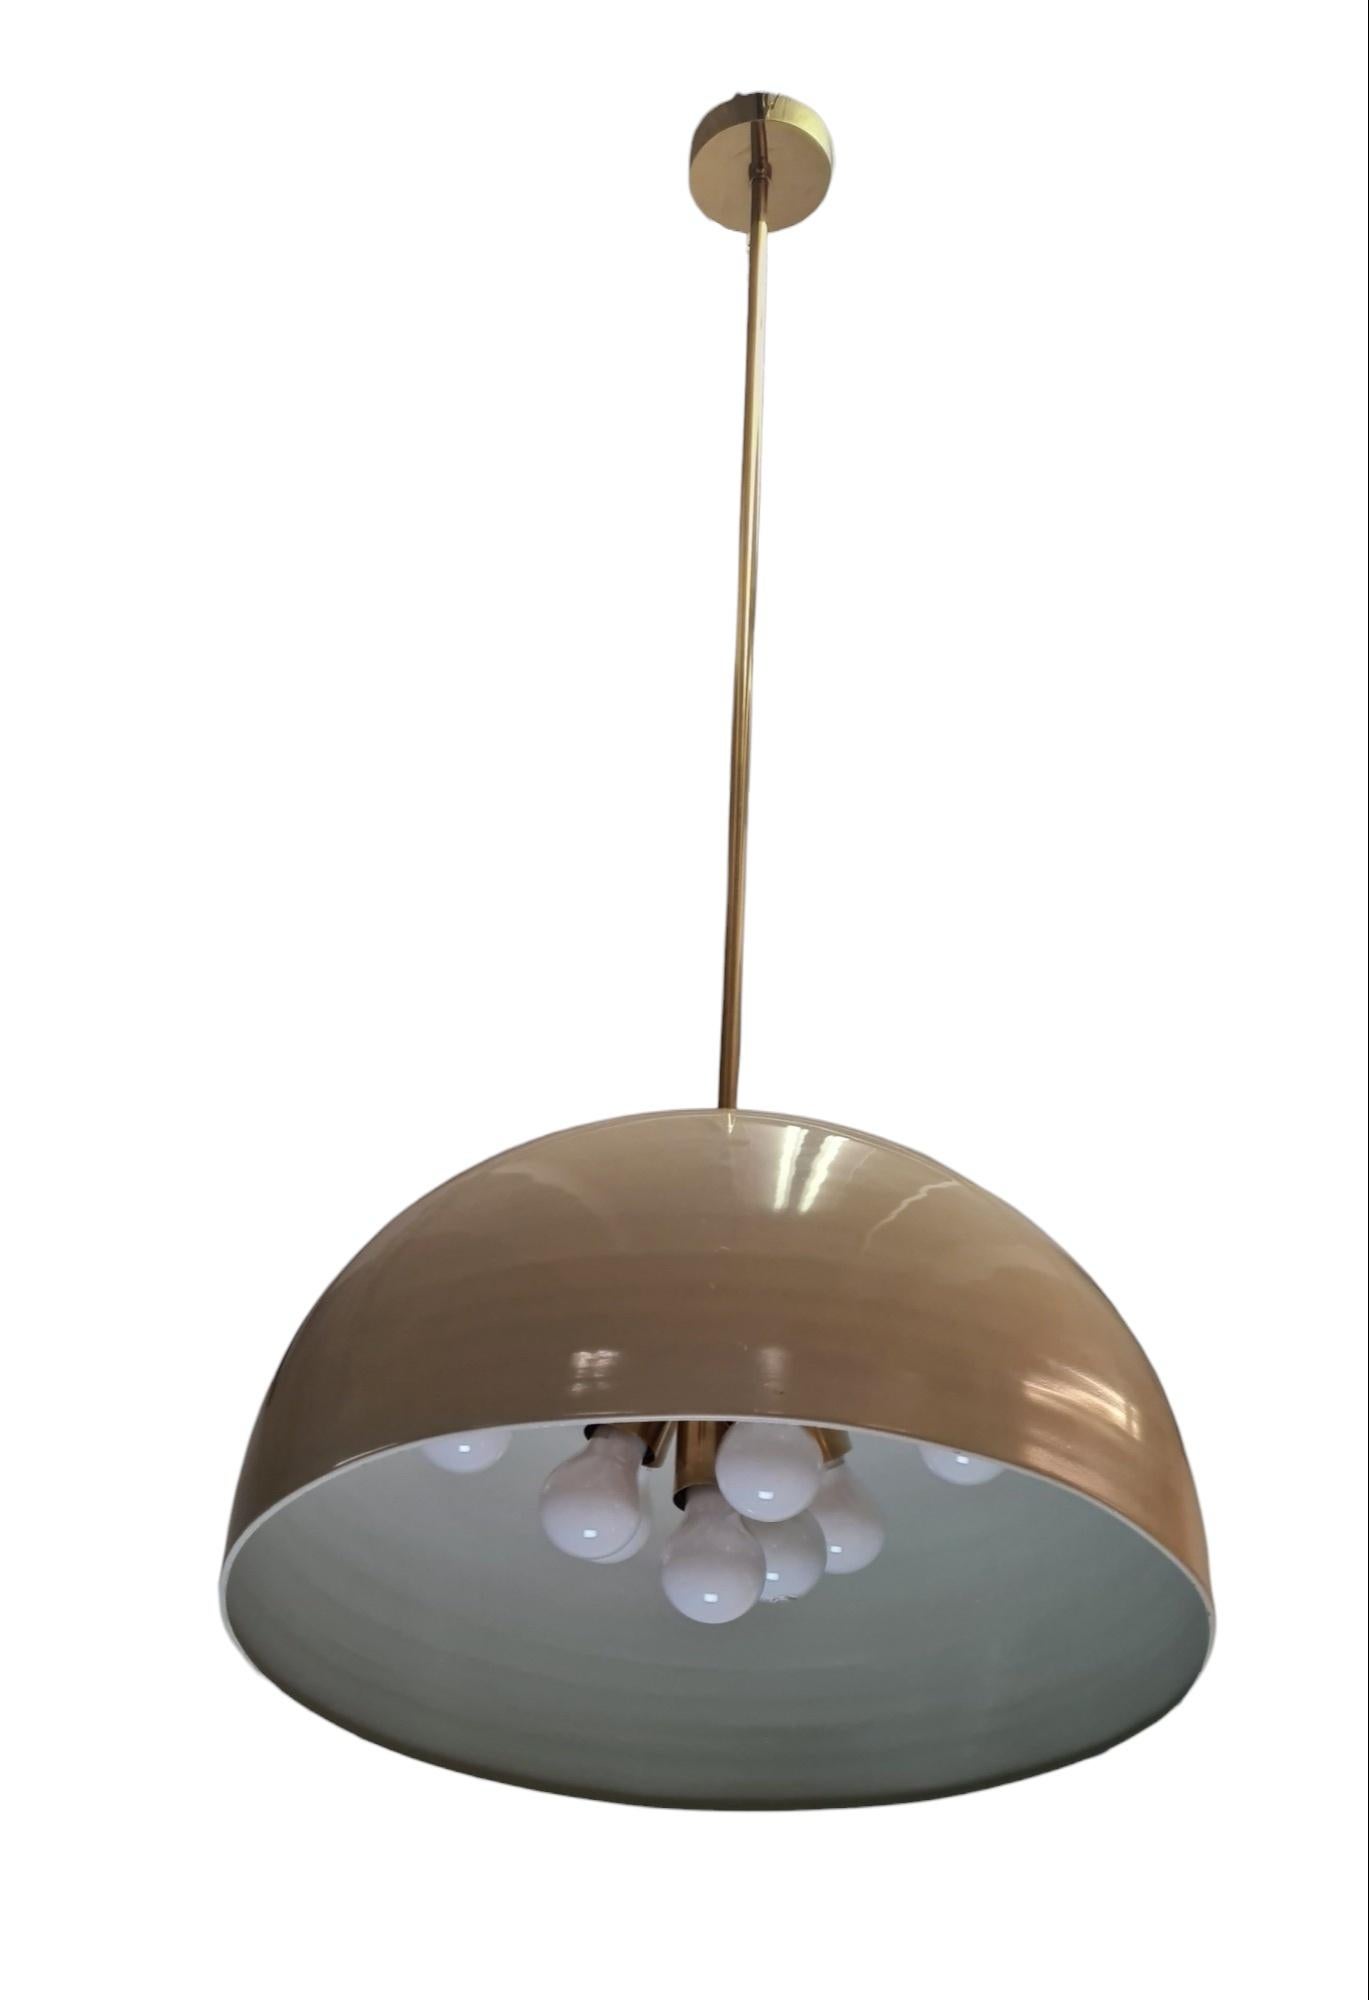 Scandinavian Modern Paavo Tynell Aulanko Hotel Ceiling Lamp  For Sale